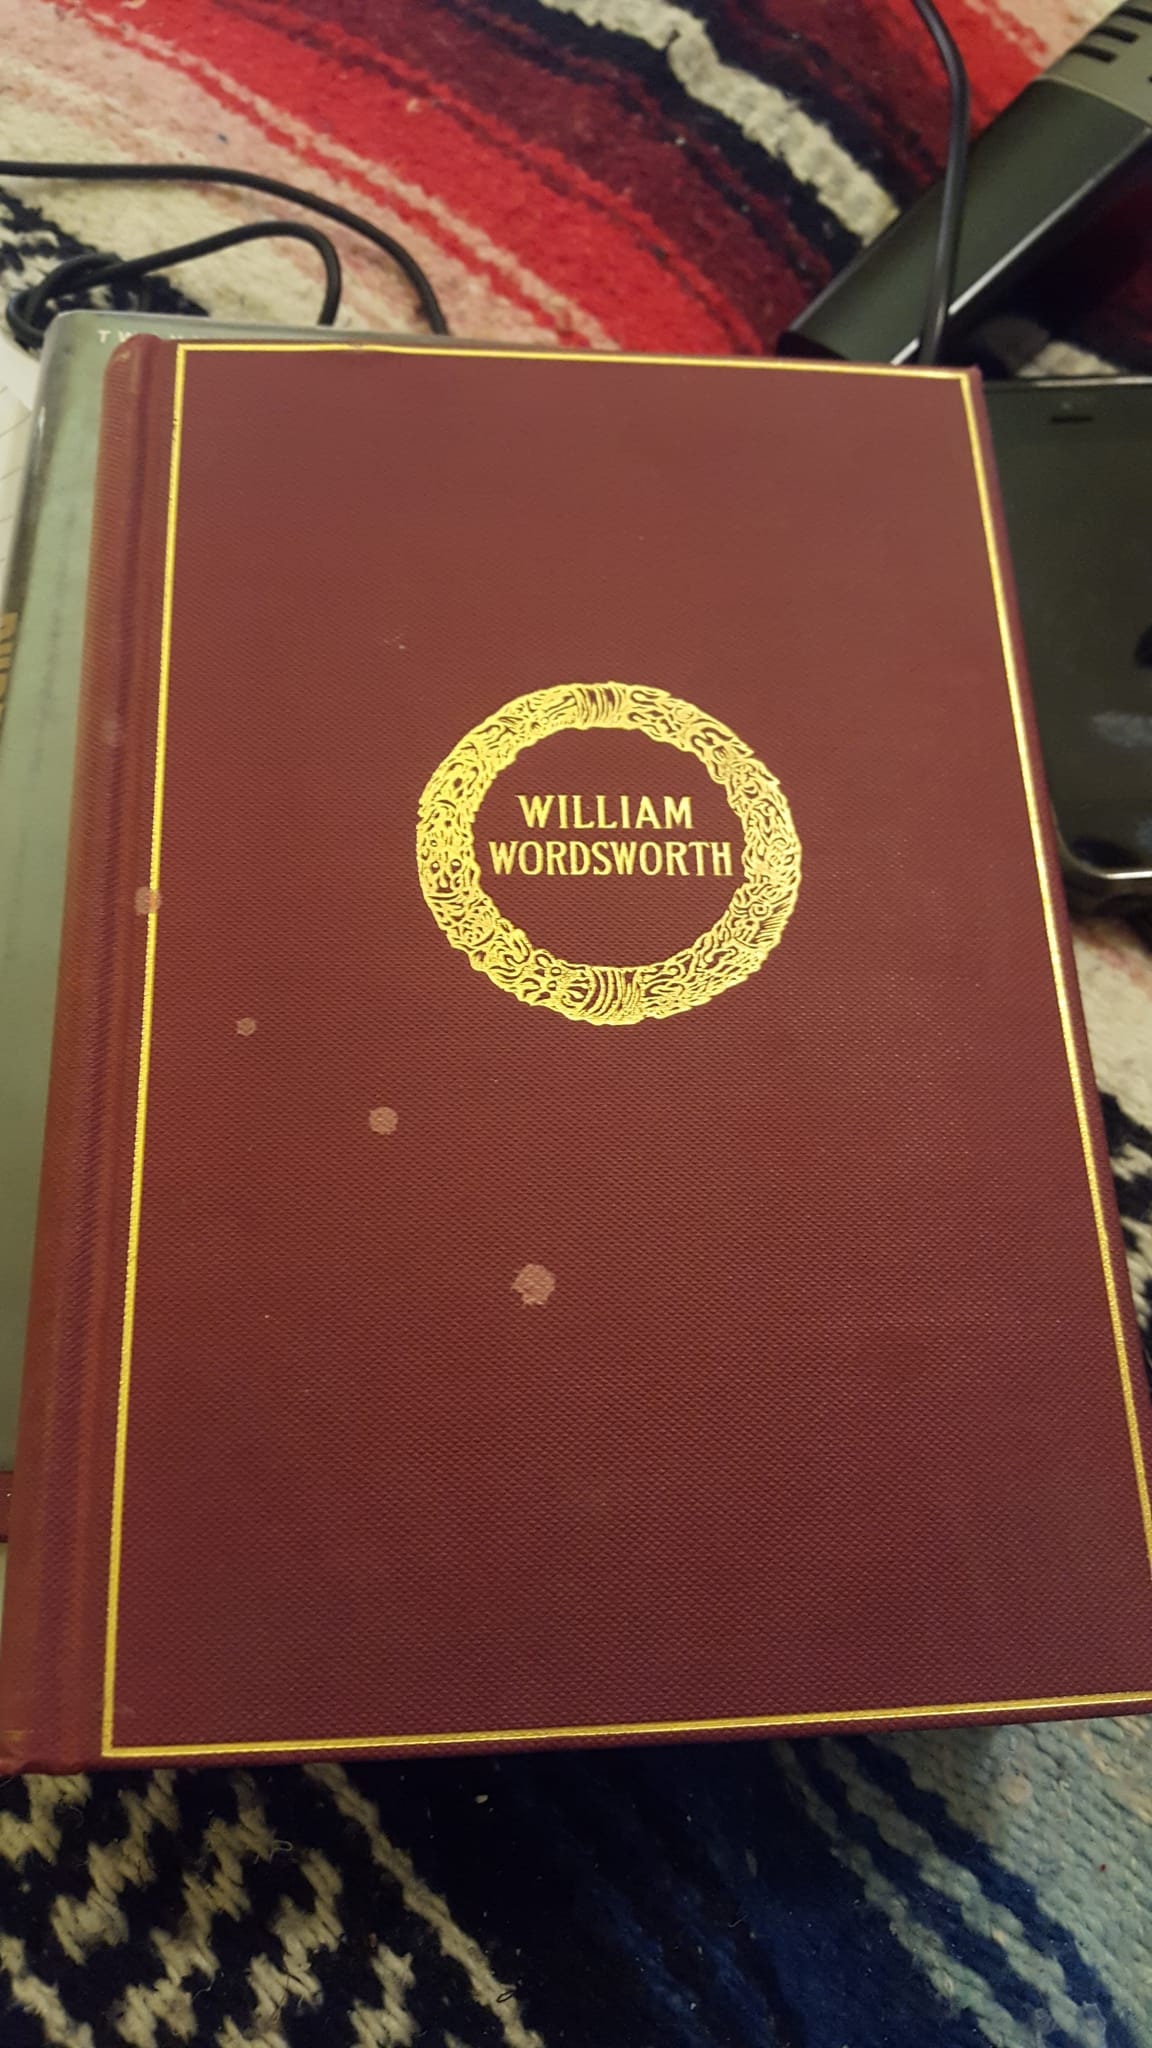 the complete poetical works of william wordsworth